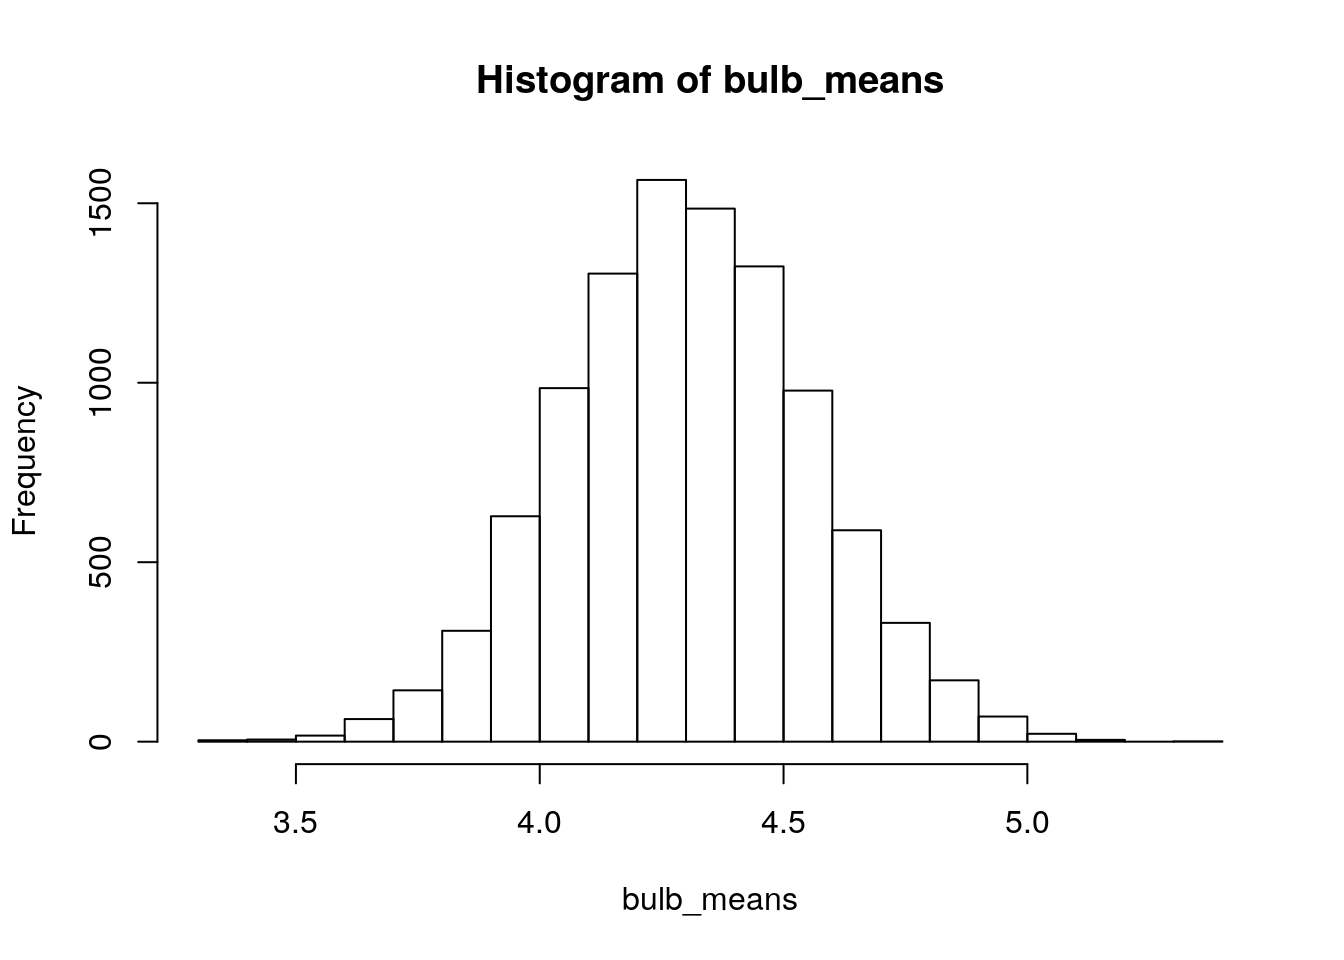 Simulated sampling distribution of mean bulb diameter.  Each sample is size n=13, and 10,000 repeated samples were taken.